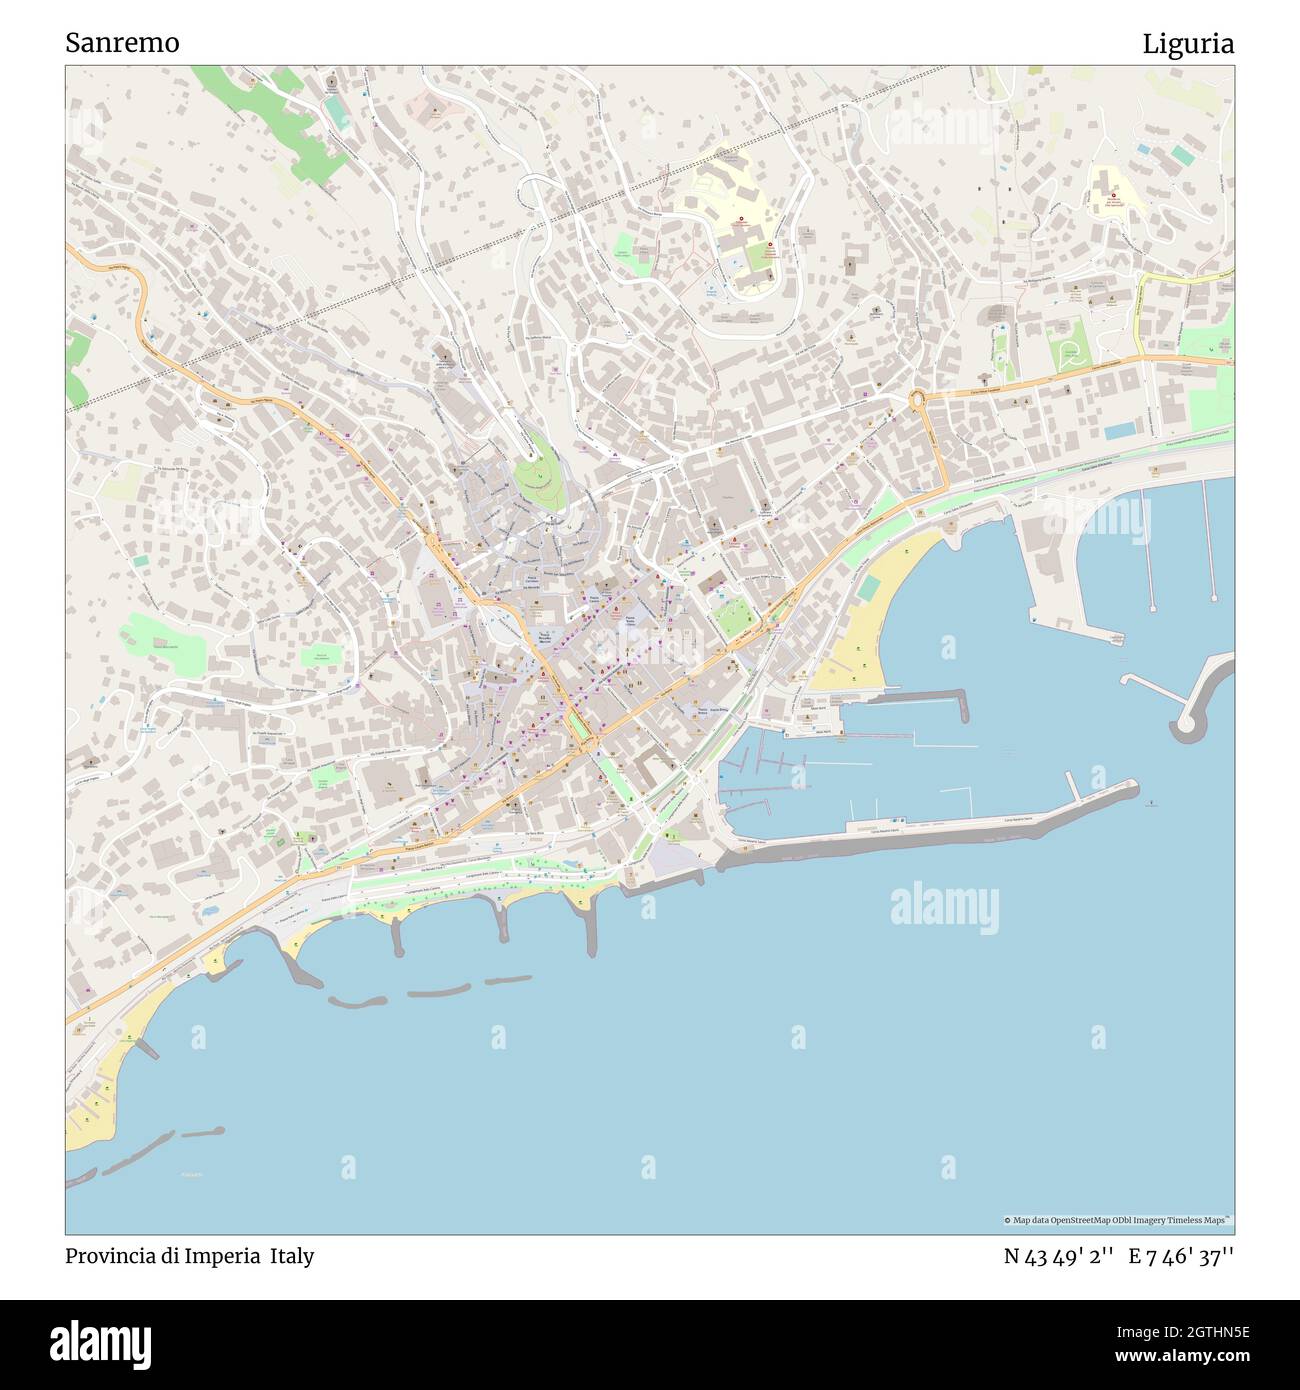 Sanremo, Provincia di Imperia, Italy, Liguria, N 43 49' 2'', E 7 46' 37'', map, Timeless Map published in 2021. Travelers, explorers and adventurers like Florence Nightingale, David Livingstone, Ernest Shackleton, Lewis and Clark and Sherlock Holmes relied on maps to plan travels to the world's most remote corners, Timeless Maps is mapping most locations on the globe, showing the achievement of great dreams Stock Photo